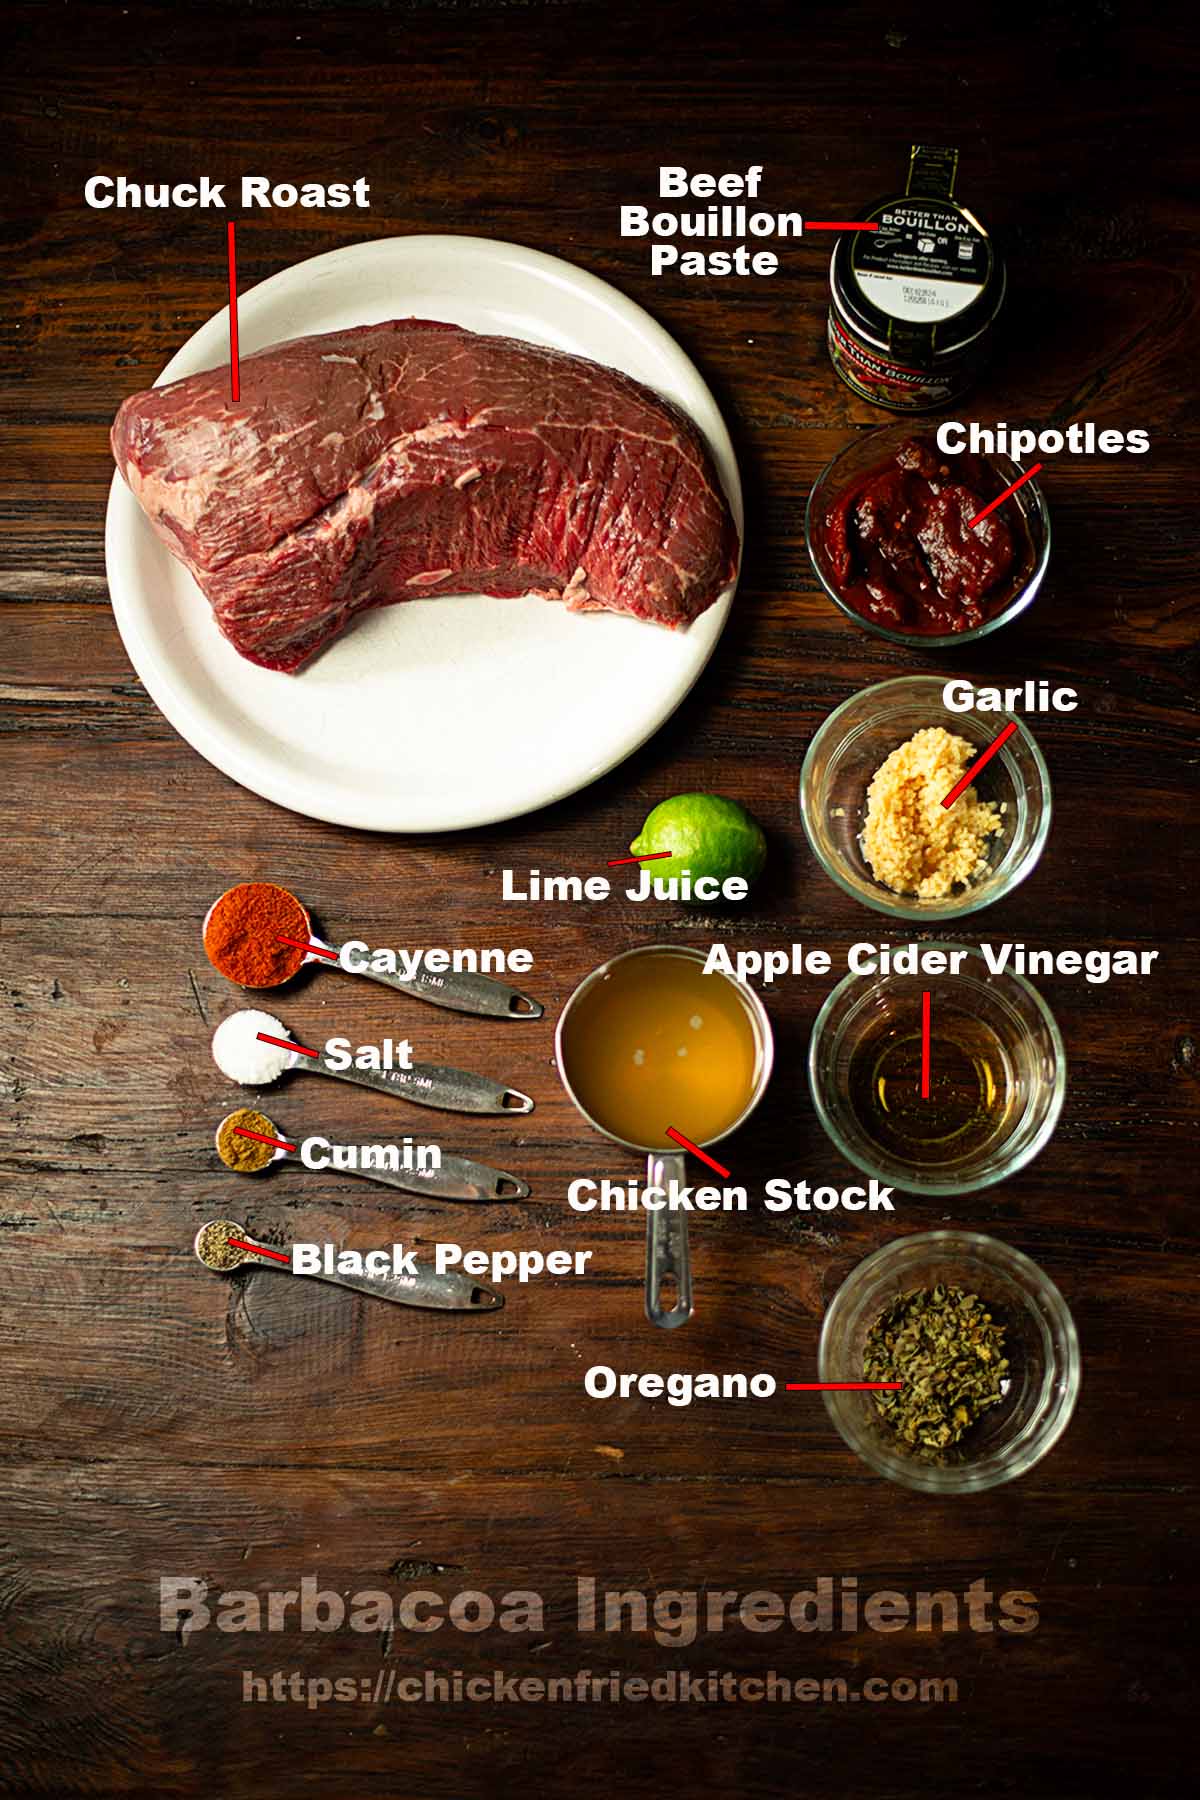 Barbacoa ingredients pictured and listed. 